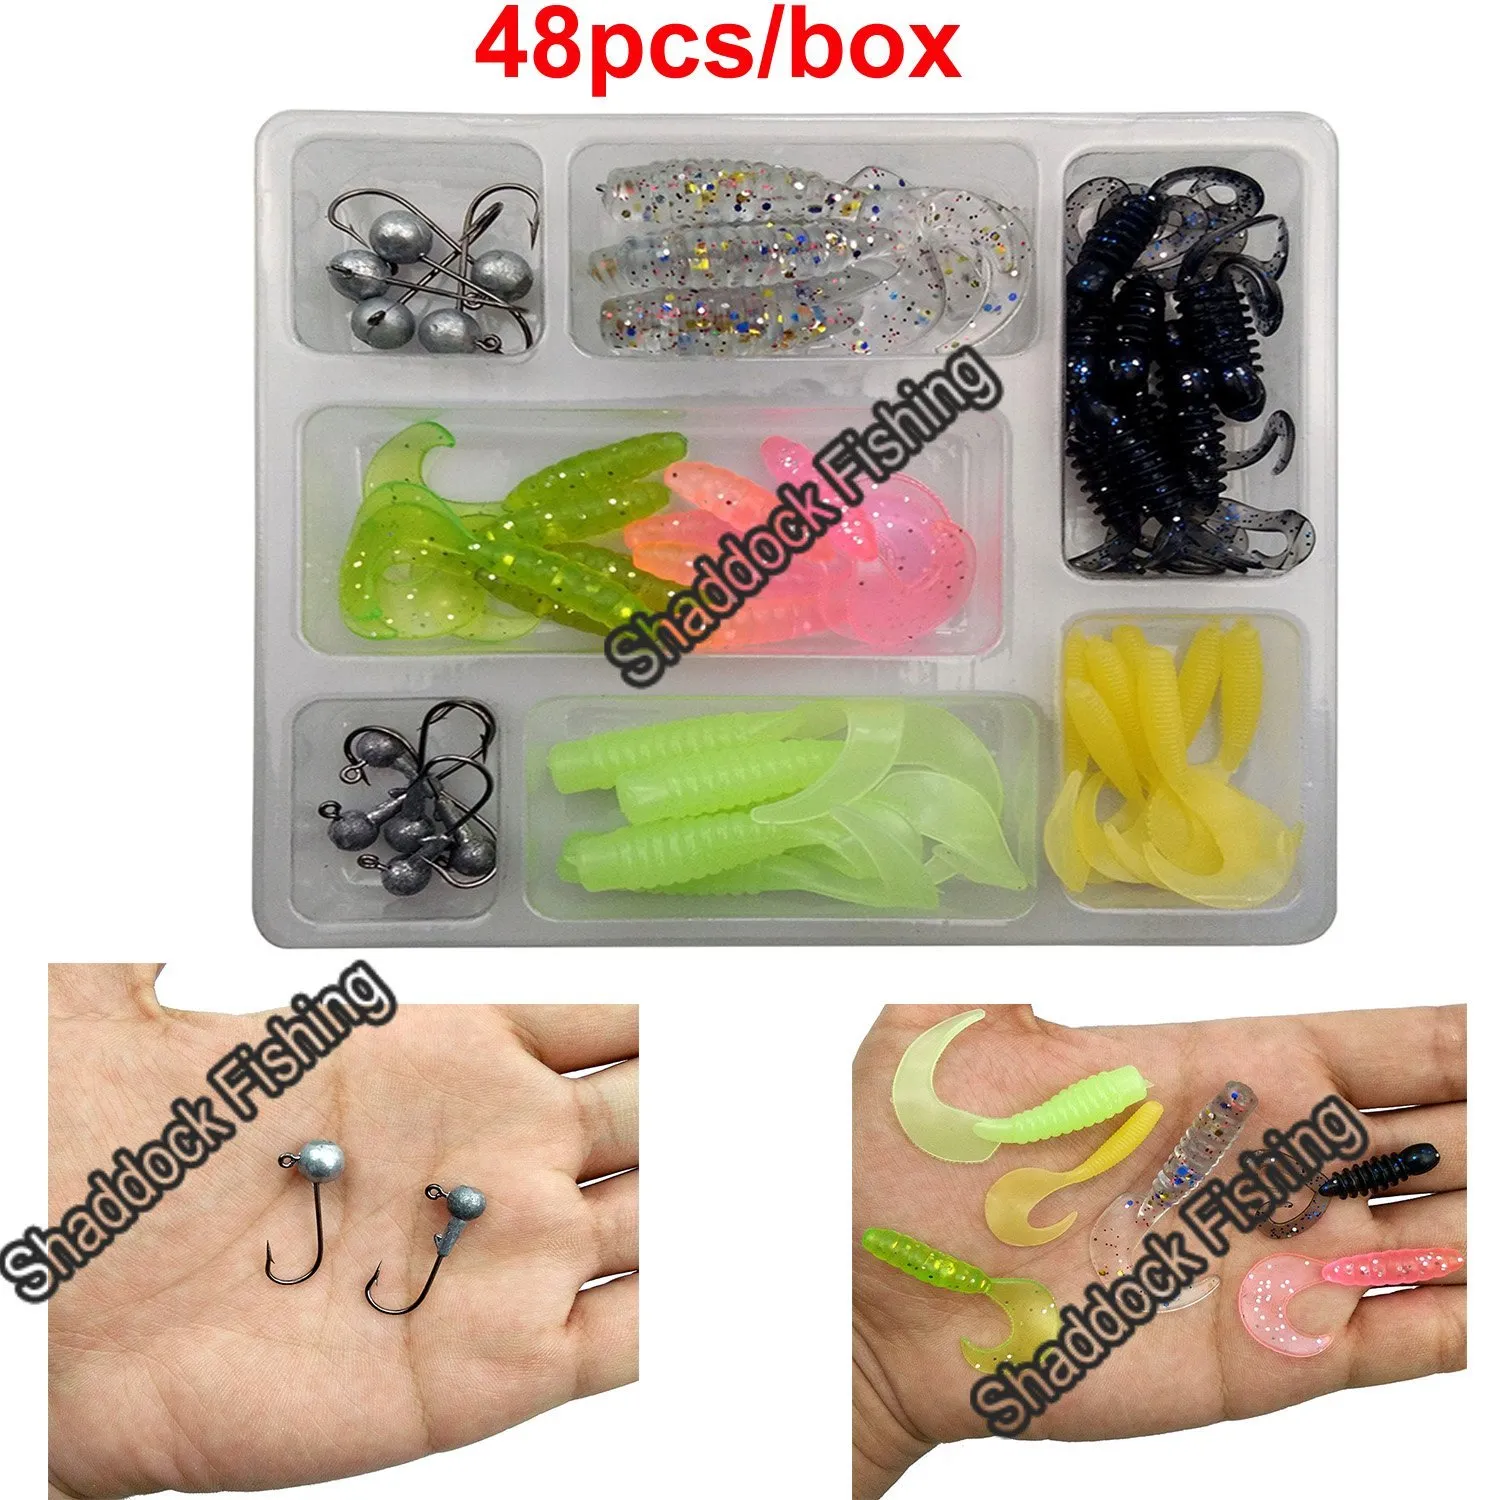 40pcs Soft Fishing Lure Kit Jig Head Hook Bait with Tackle Box (Style C)